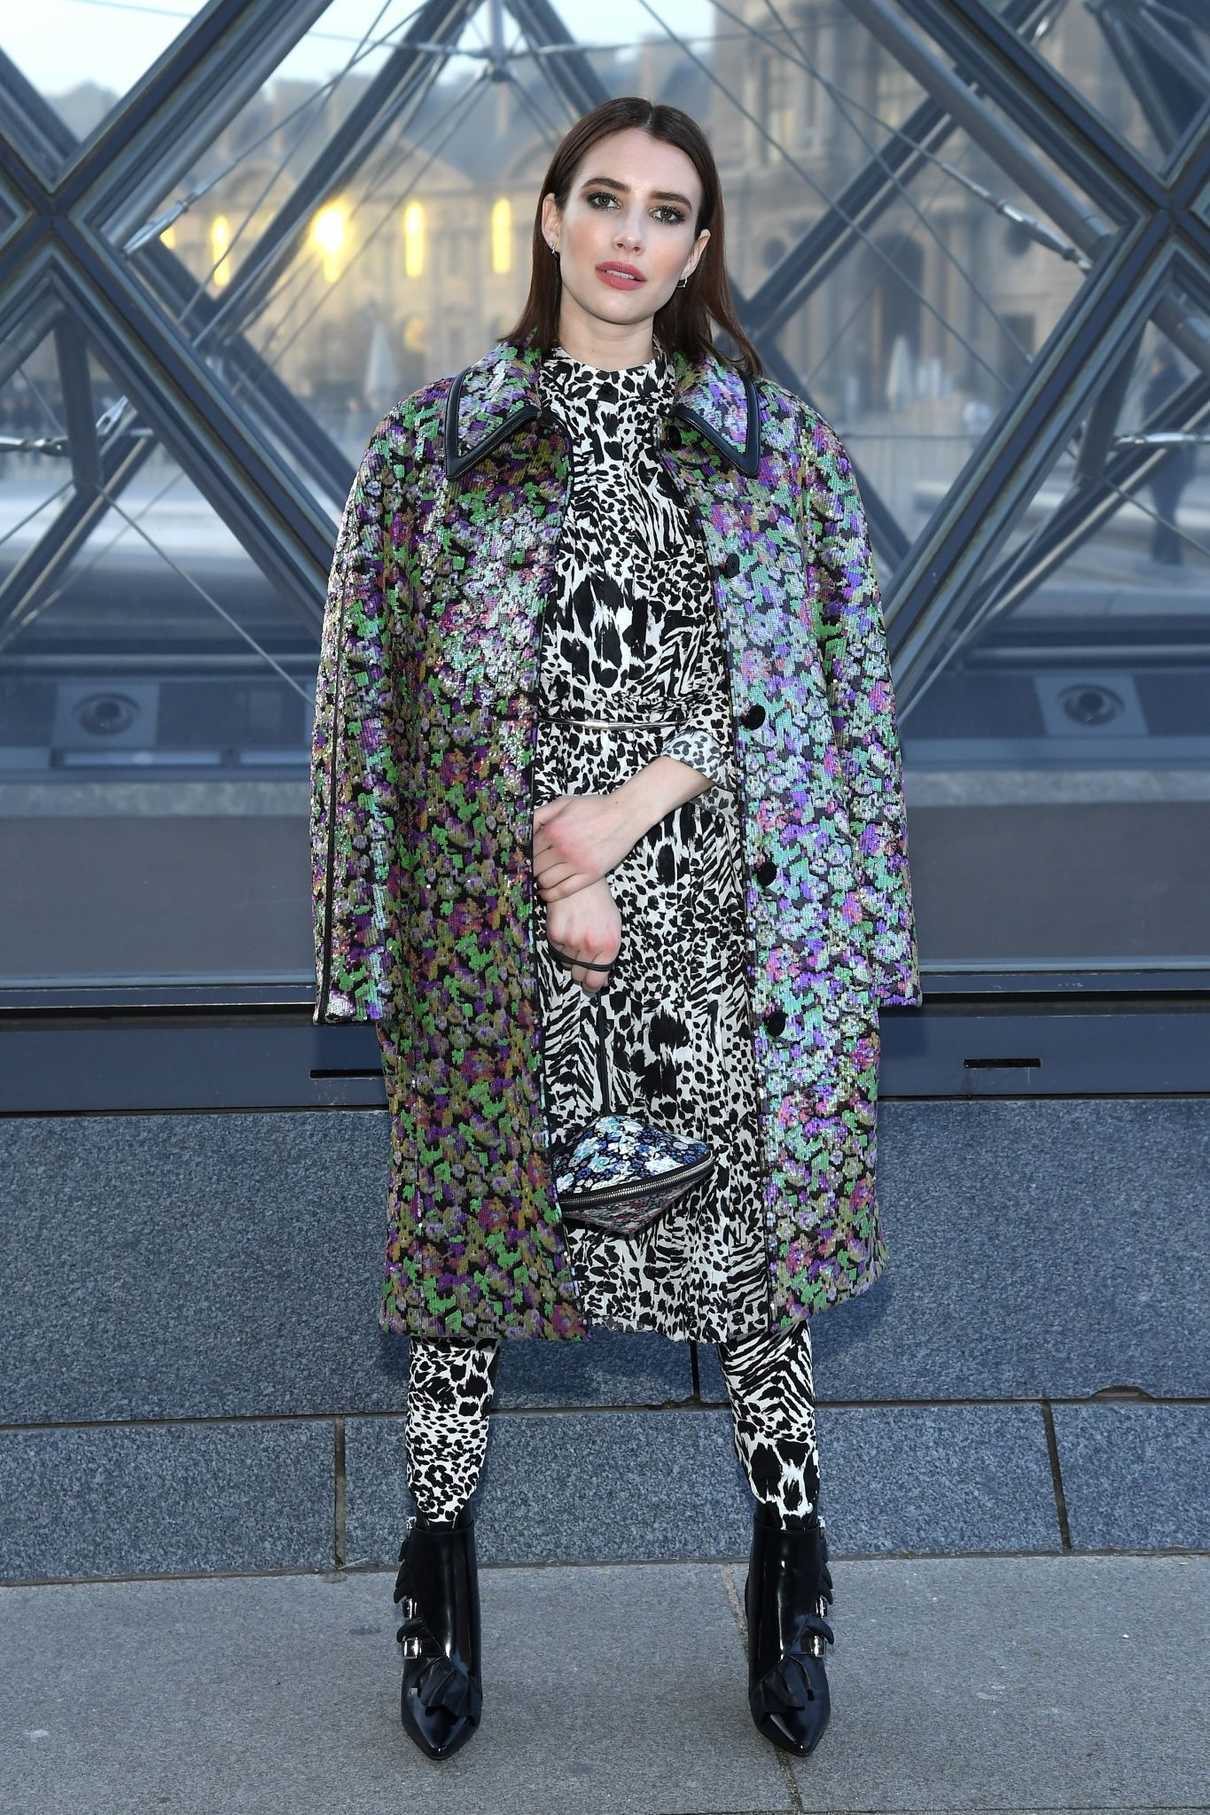 Emma Roberts Attends the Louis Vuitton Fashion Show During PFW in Paris ...